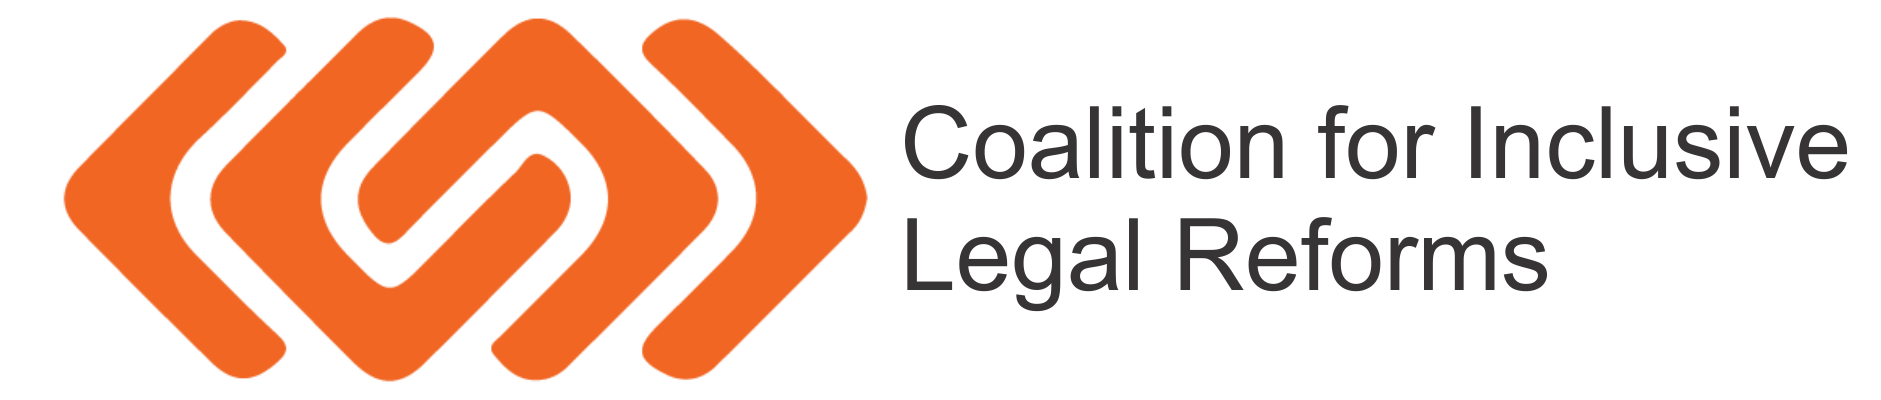 The Coalition for Inclusive Legal Reforms